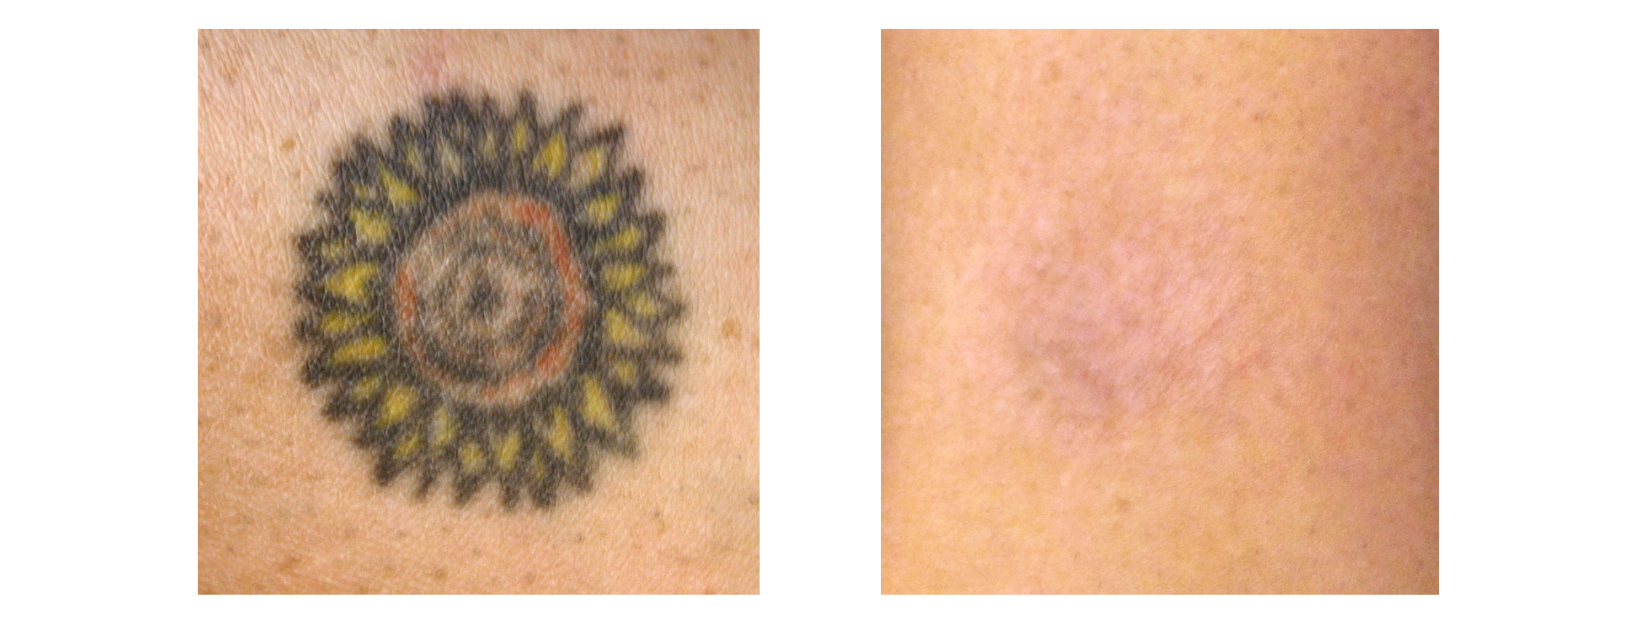 Tattoo Removal Black, Yellow and Red Tones